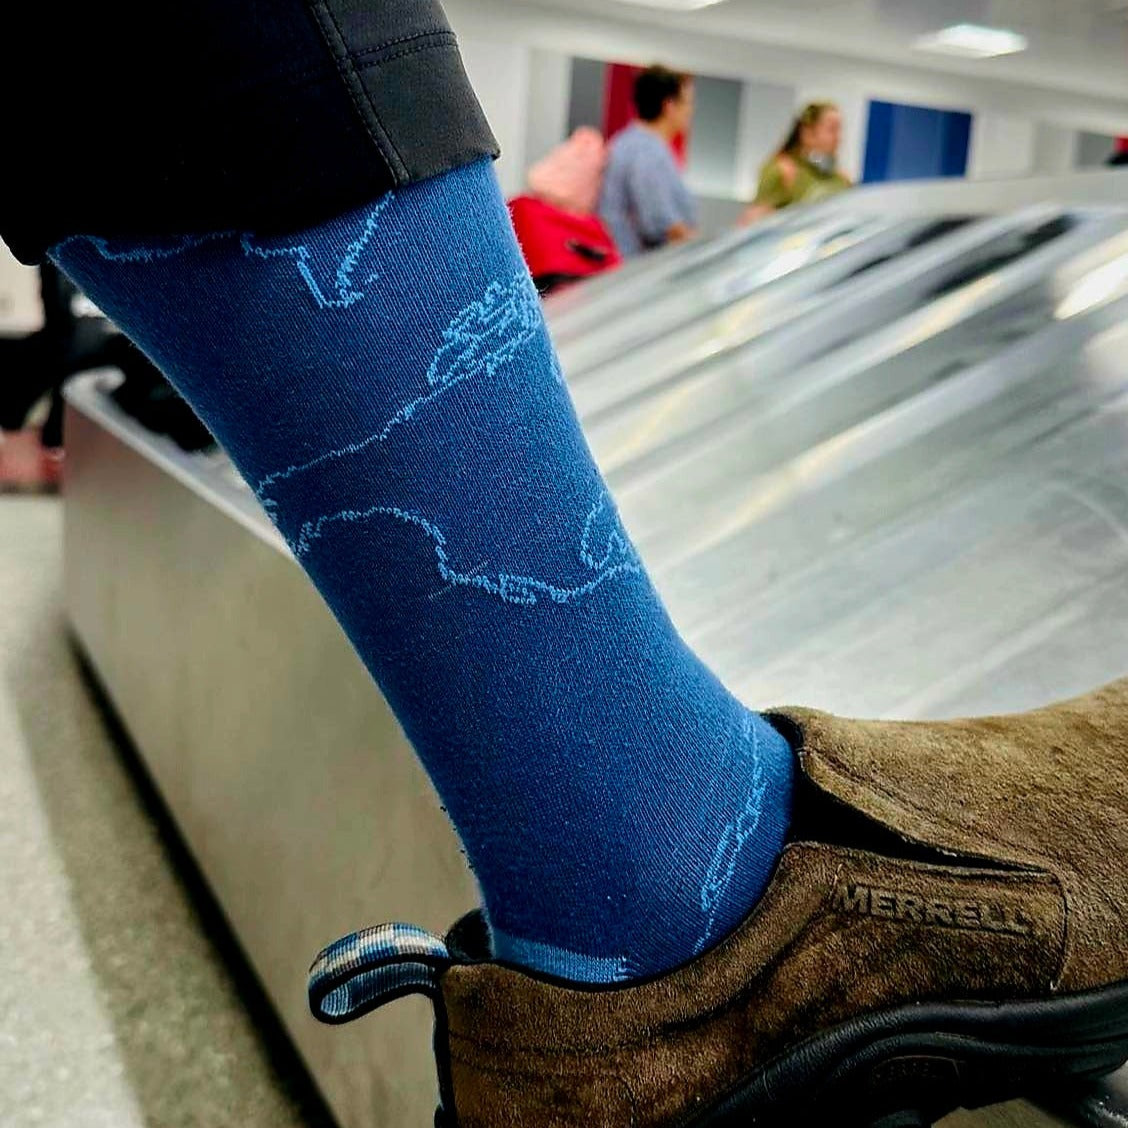 World Map Socks (We Are All In This Together) from the Sock Panda